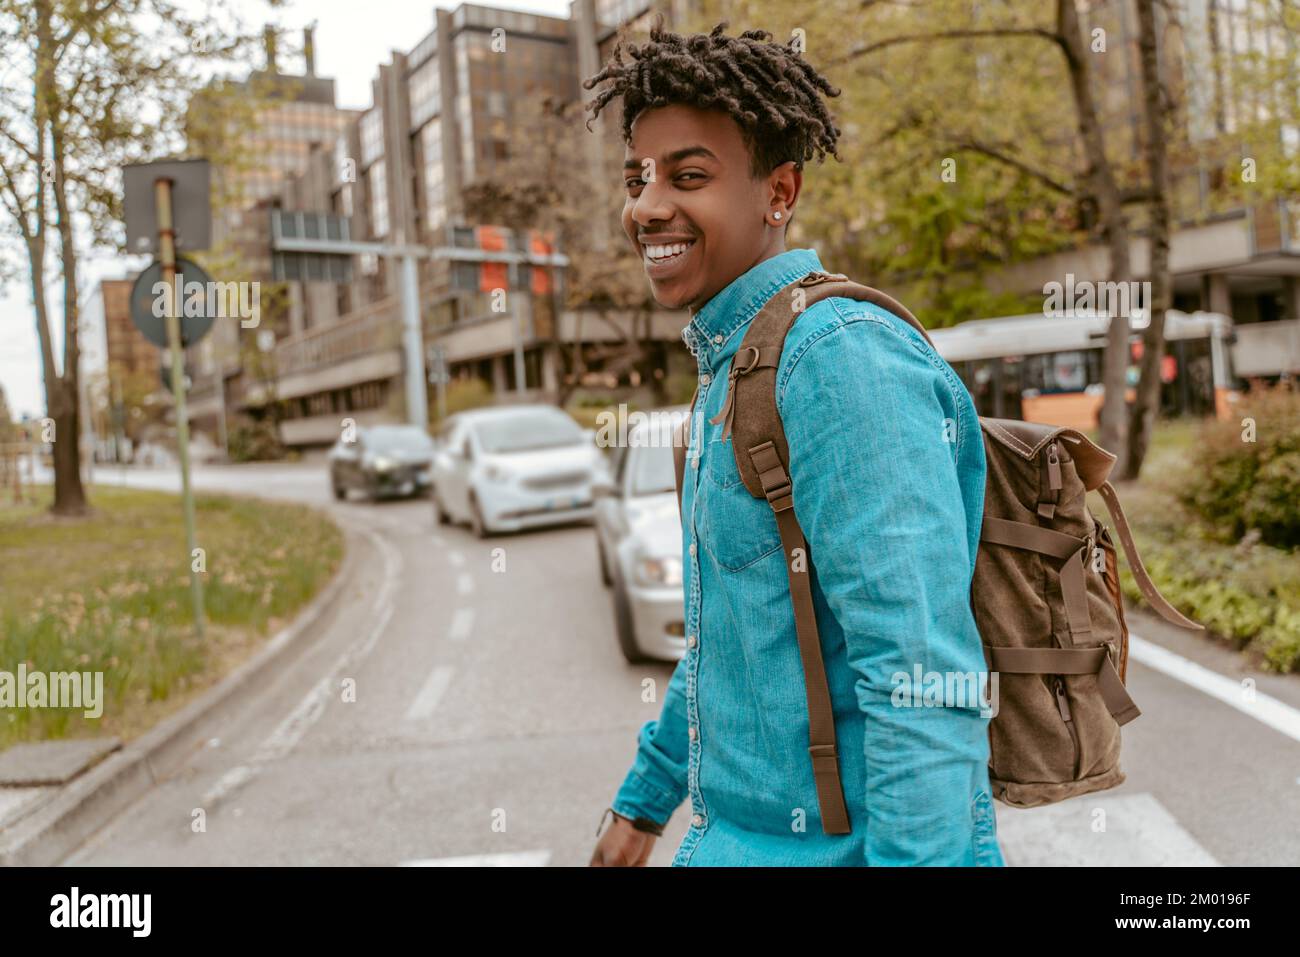 City energy. Dark-skinned stylish guy with backpack smiling confidently at camera crossing road in city. Stock Photo